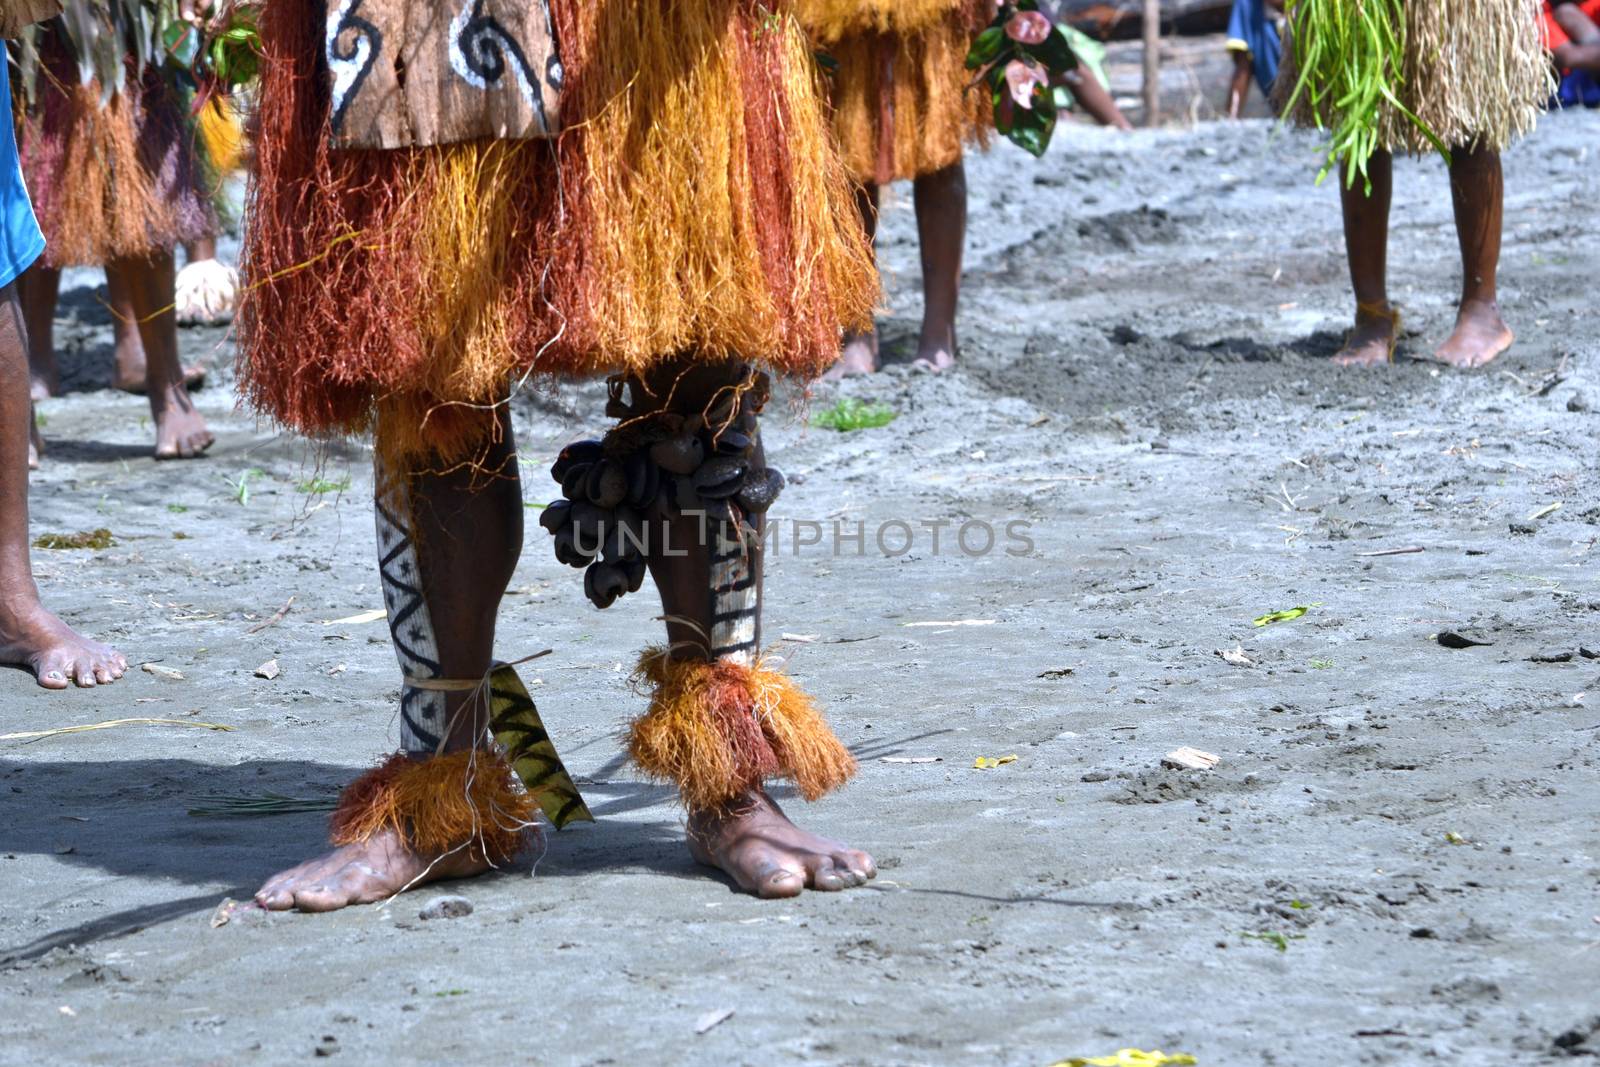 Traditional tribal dance at mask festival by danemo